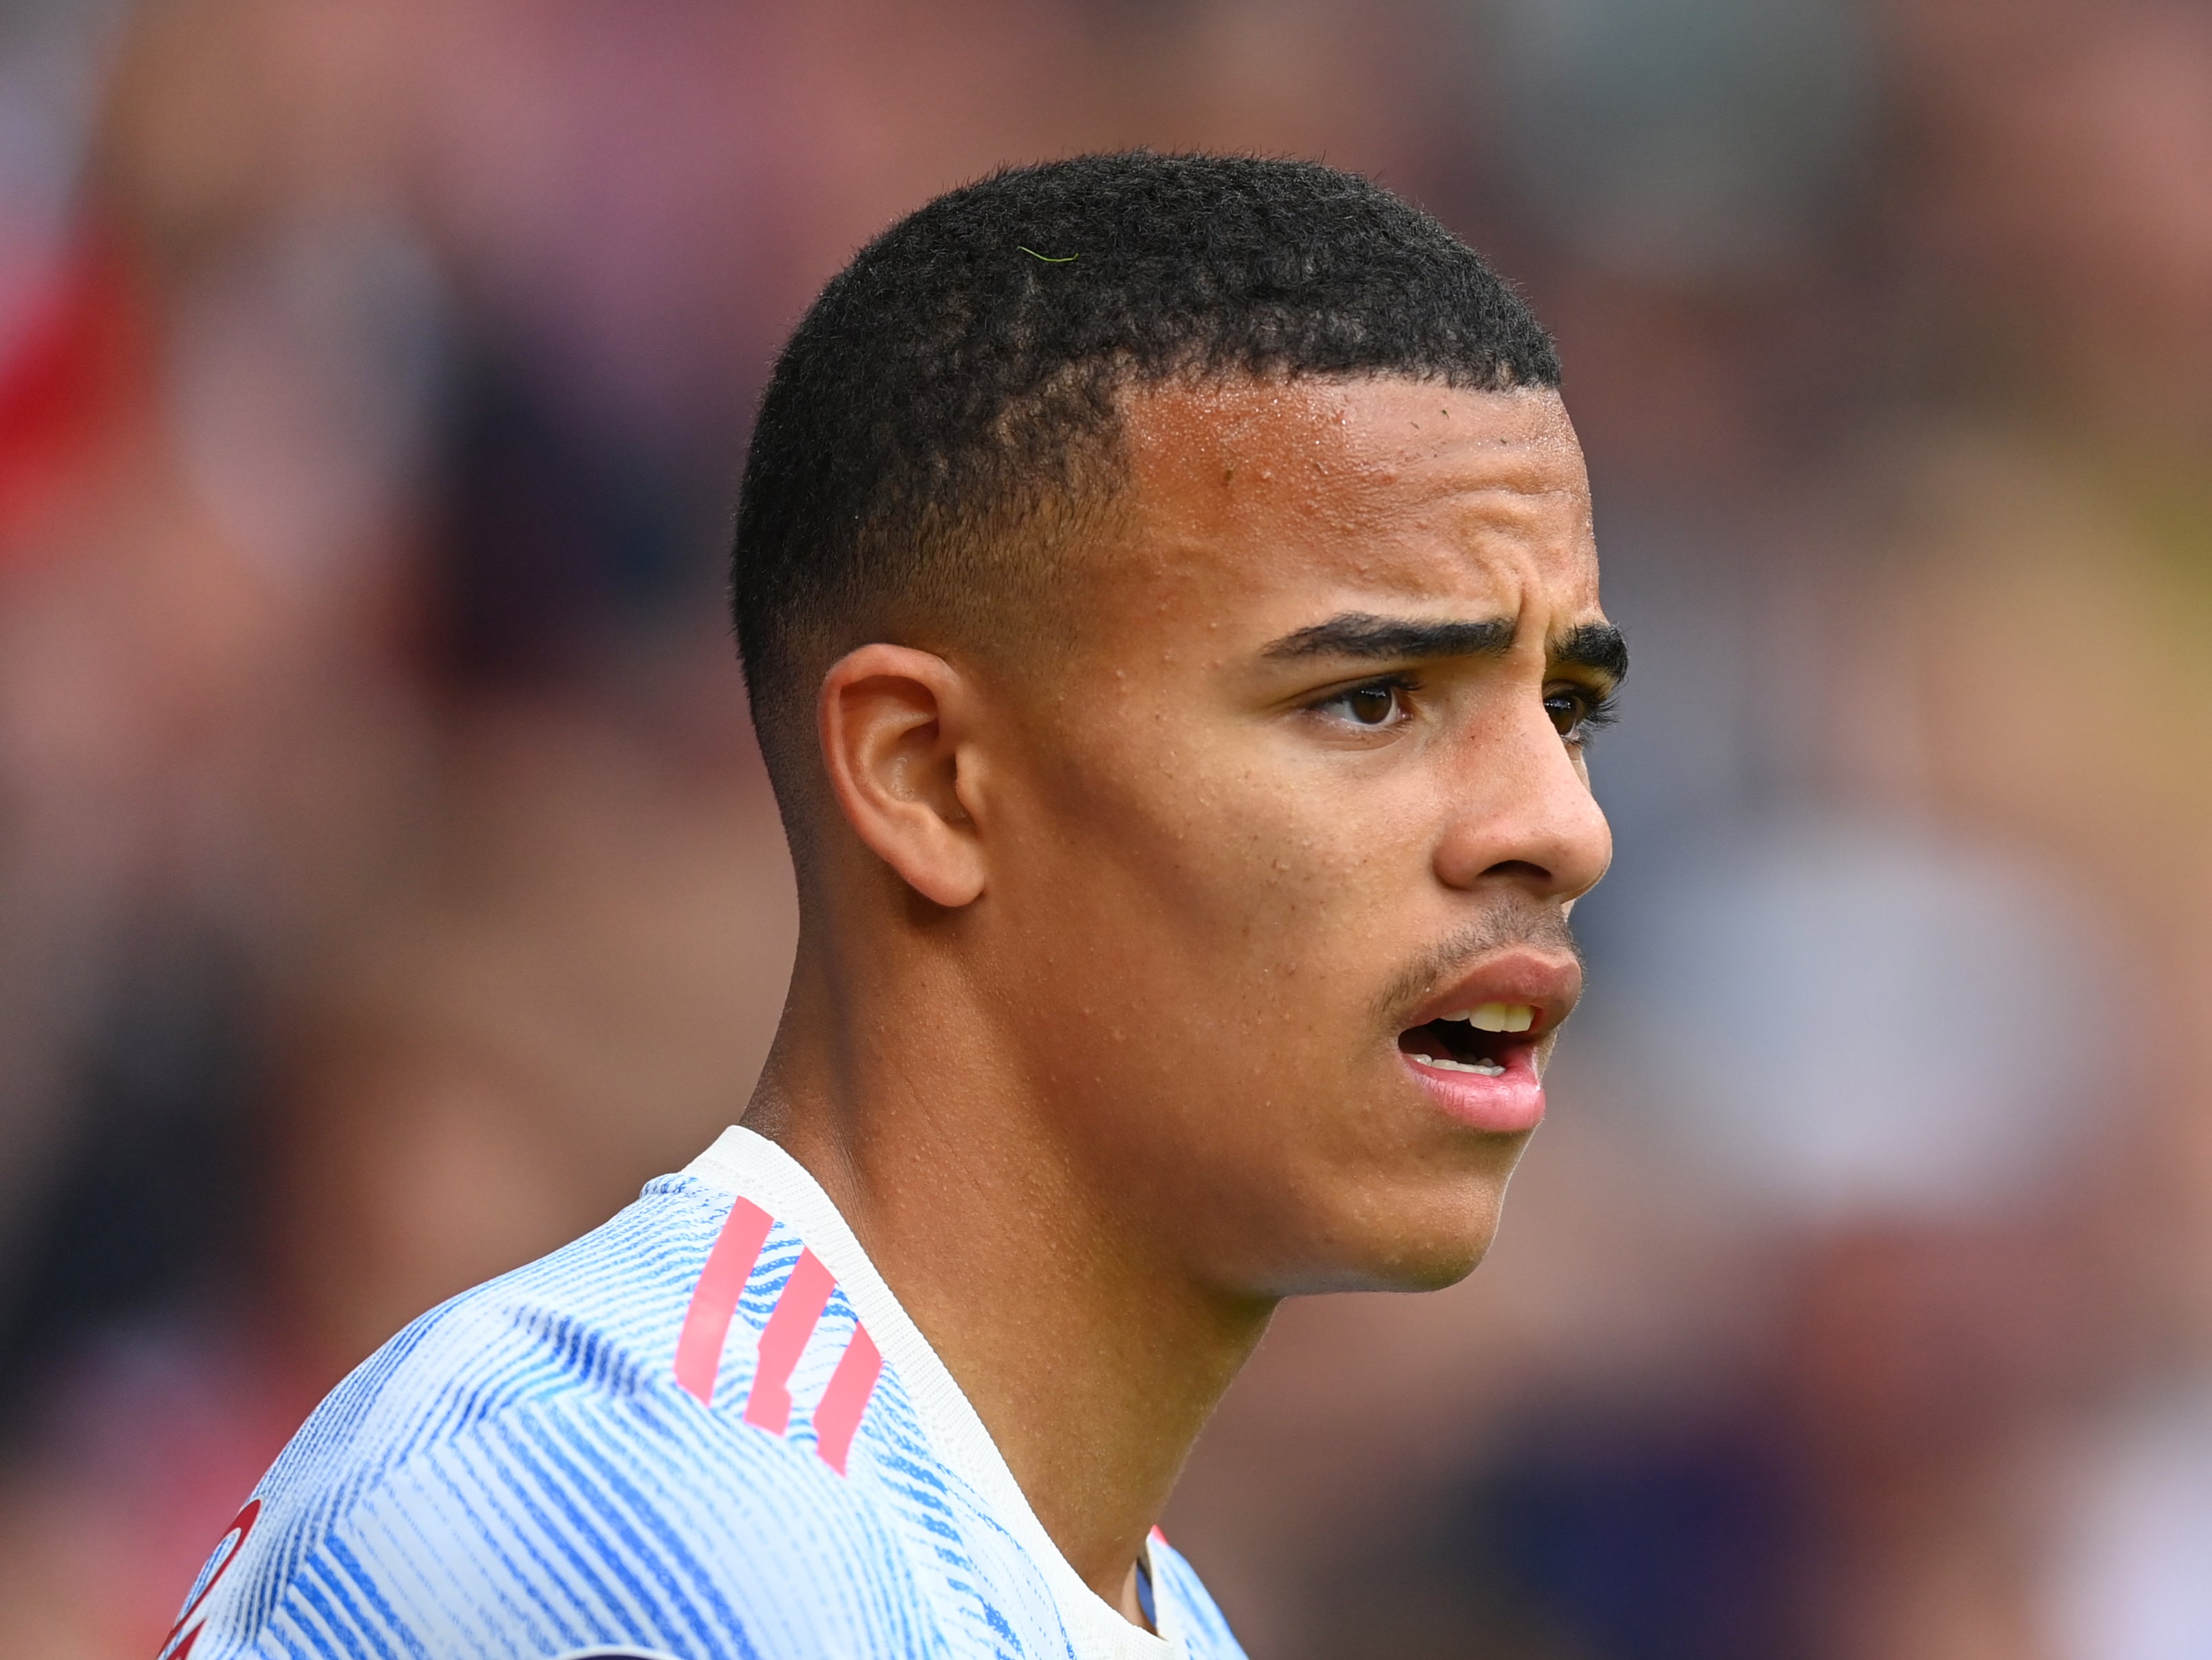 The Mason Greenwood situation has left Manchester United with a dilemma